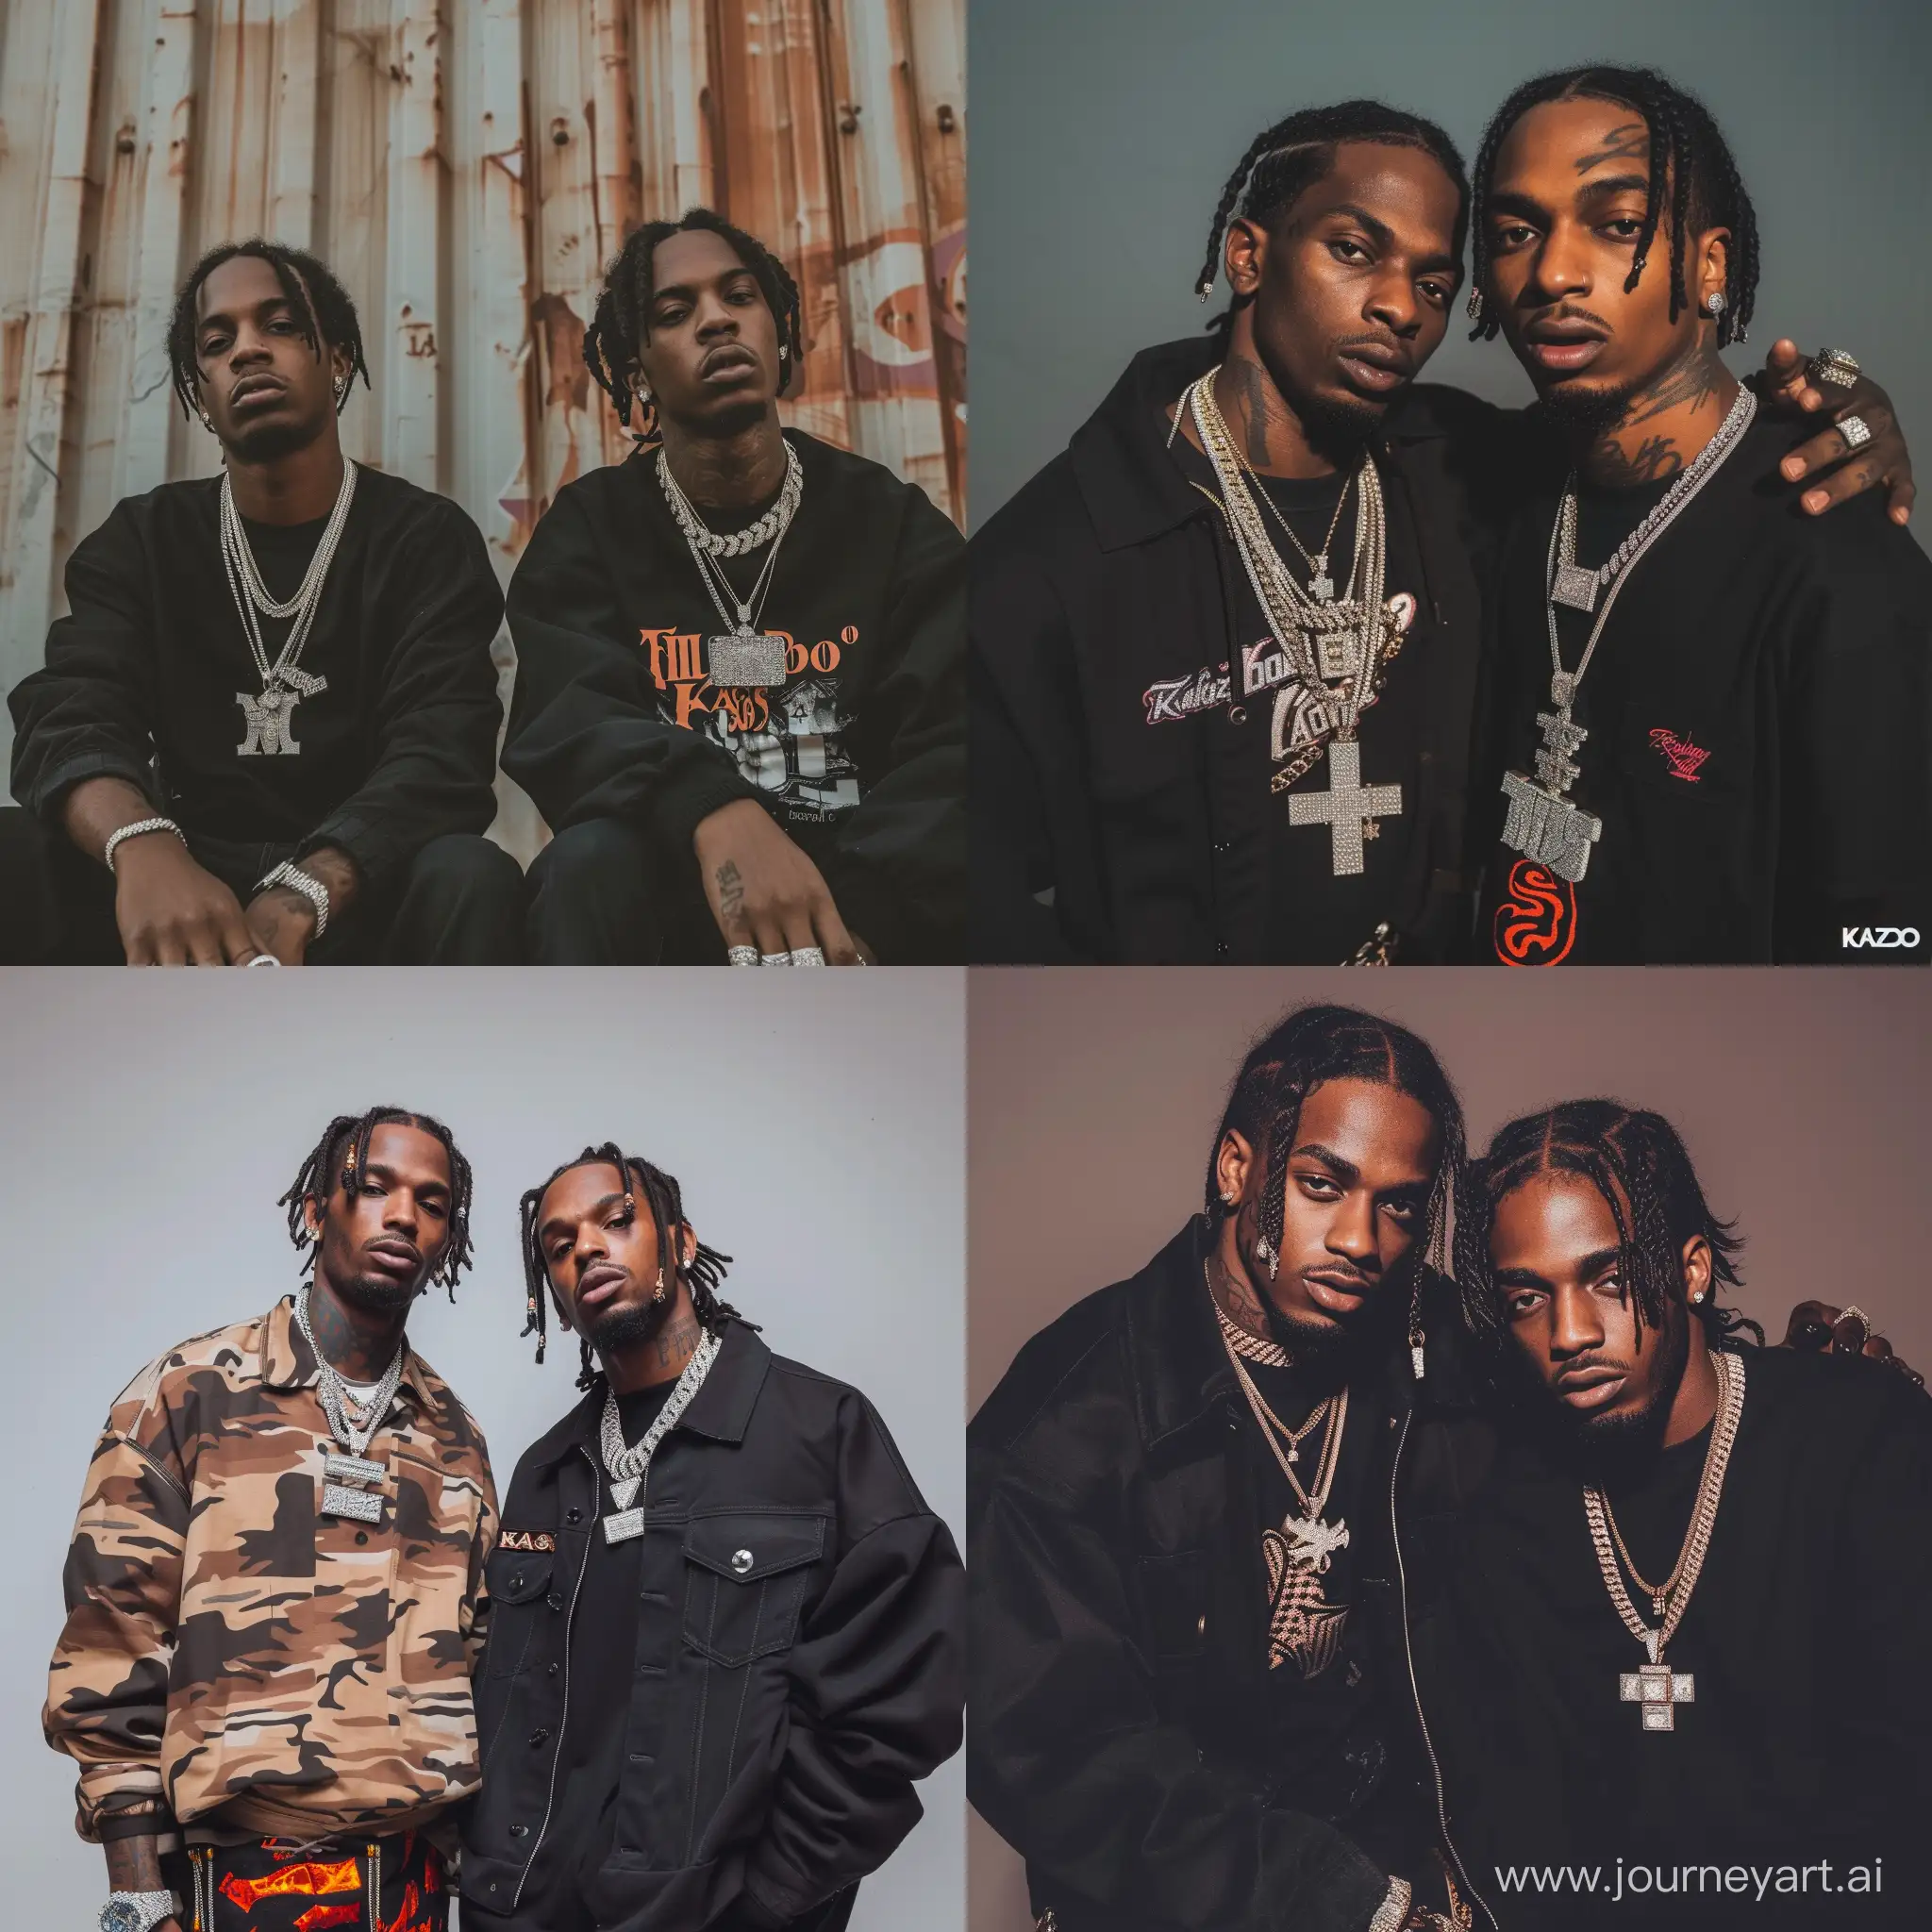 make me a post with rap references like travis scott, with the name "Filhos do Kaos", two brothers